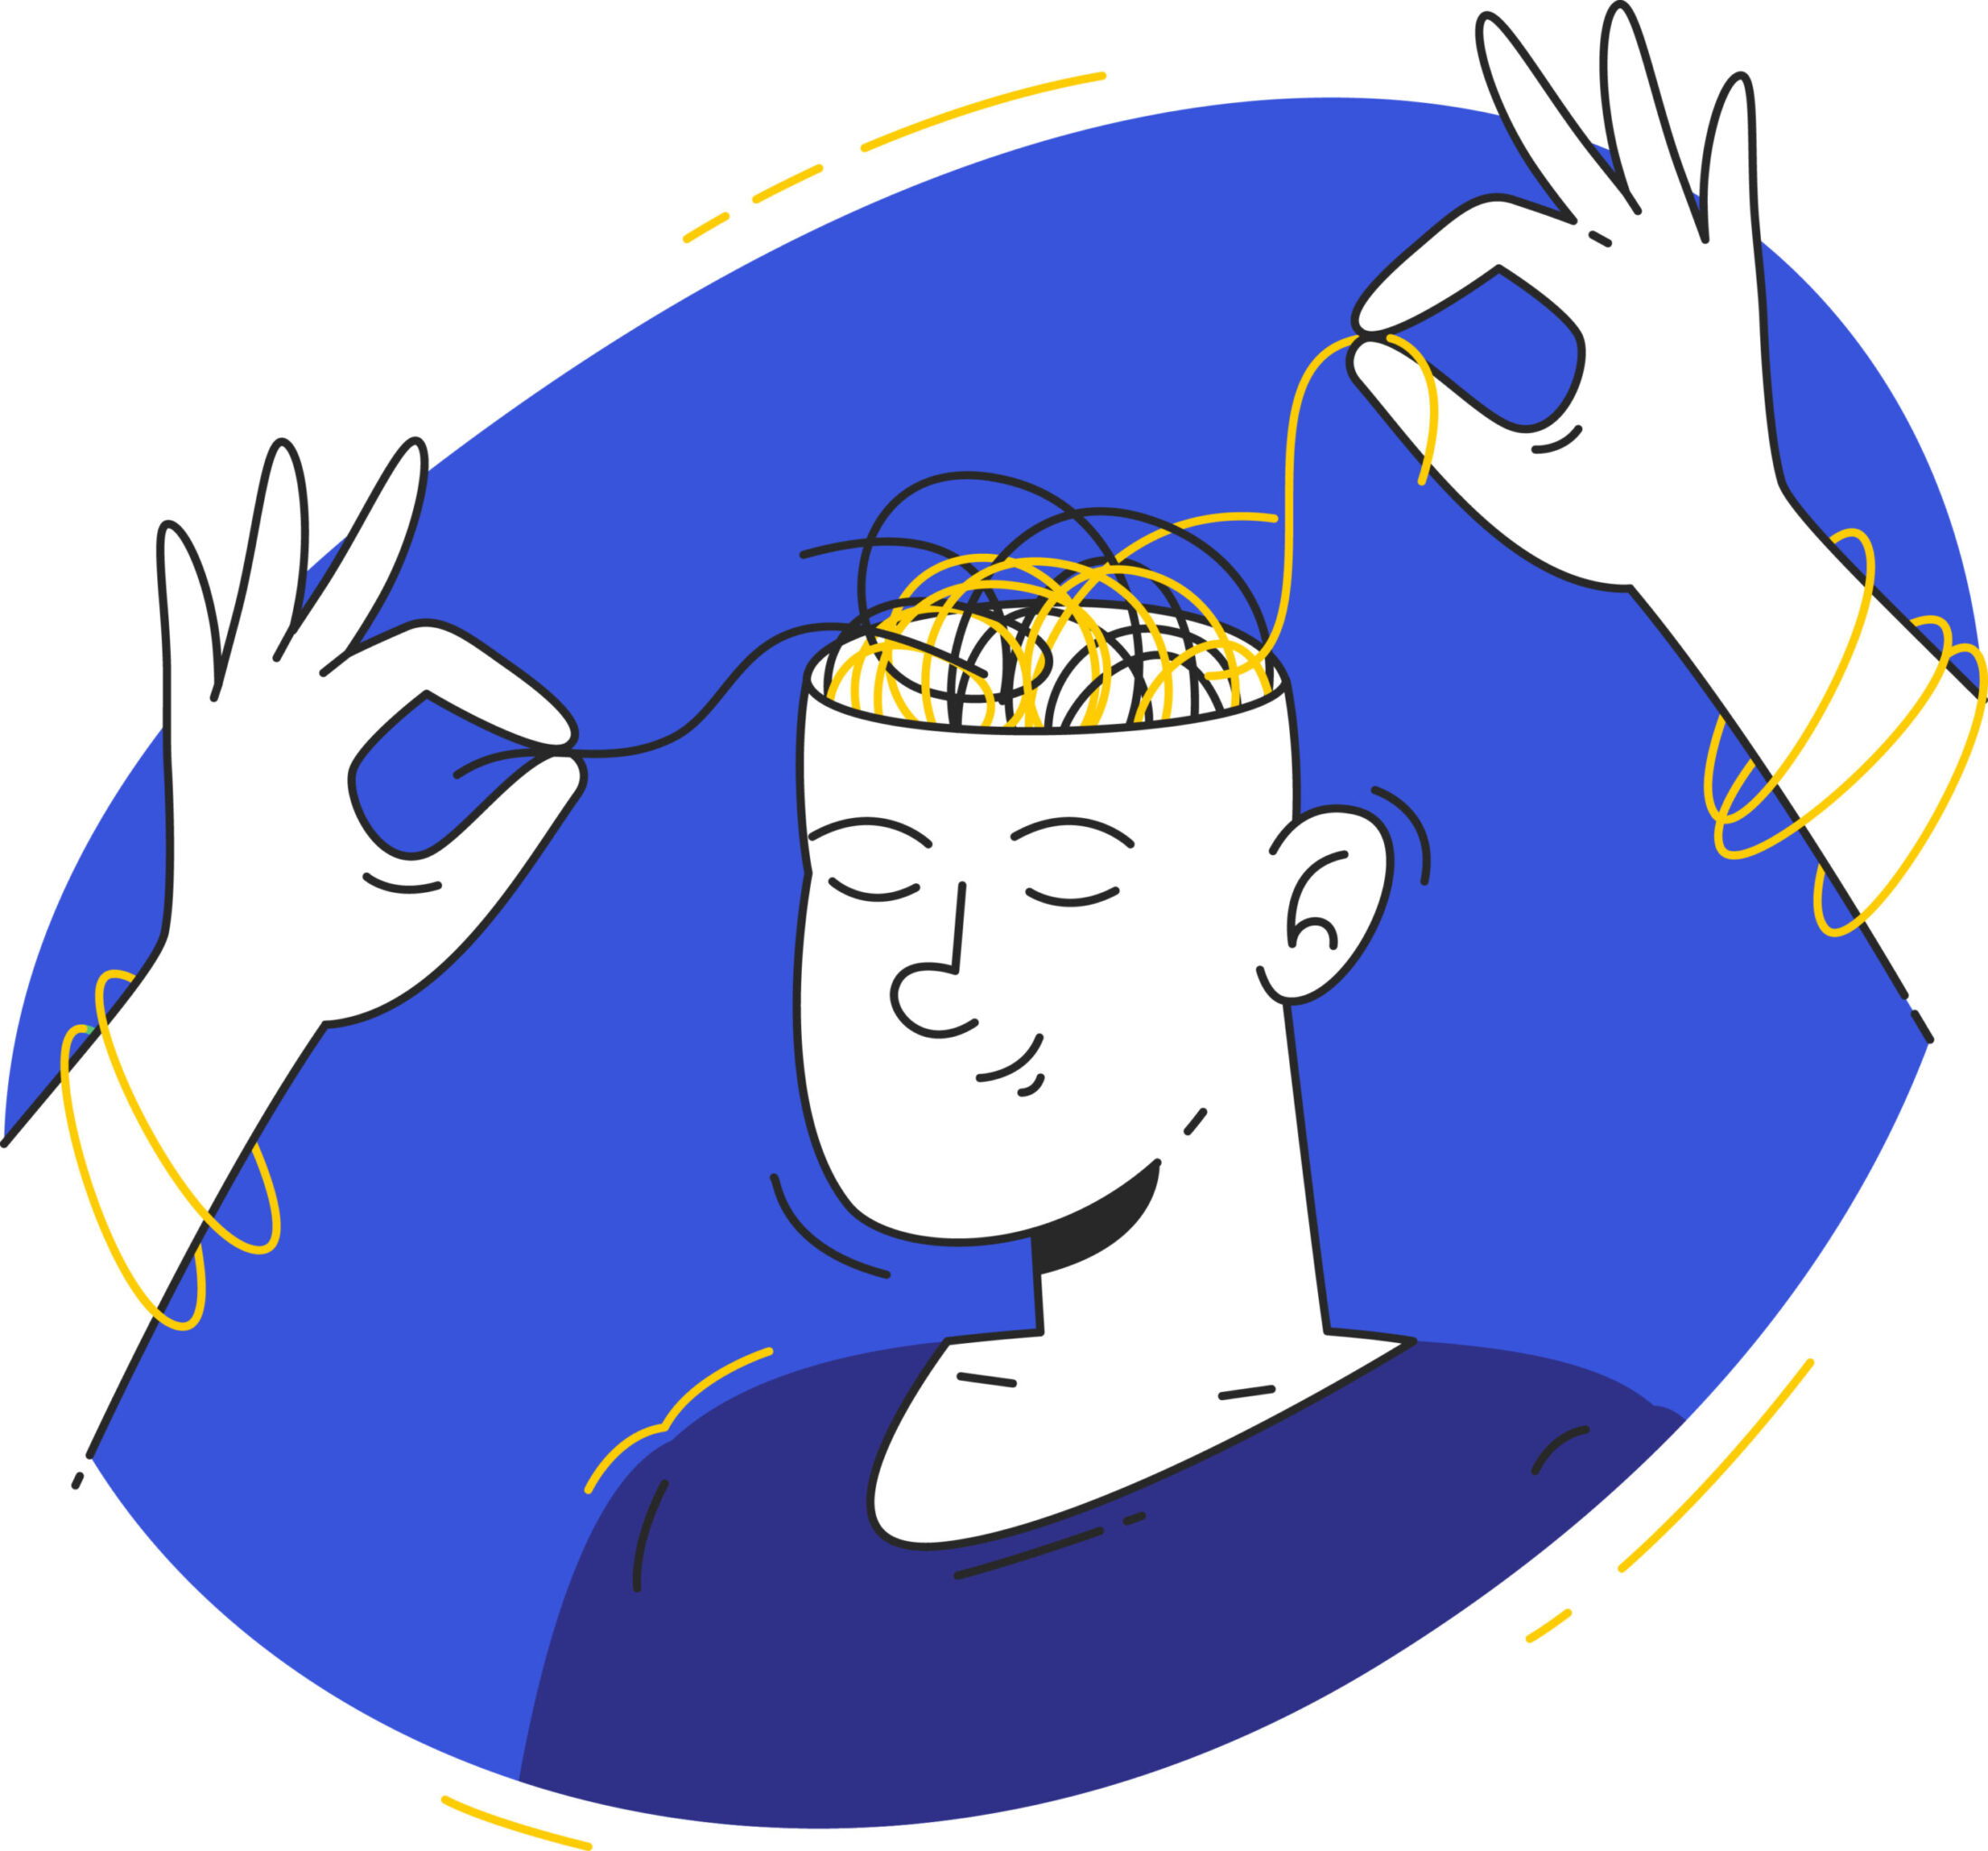 image shows a drawing of a person pulling noodles out of their head. it is graphic and illustrative, not realistic